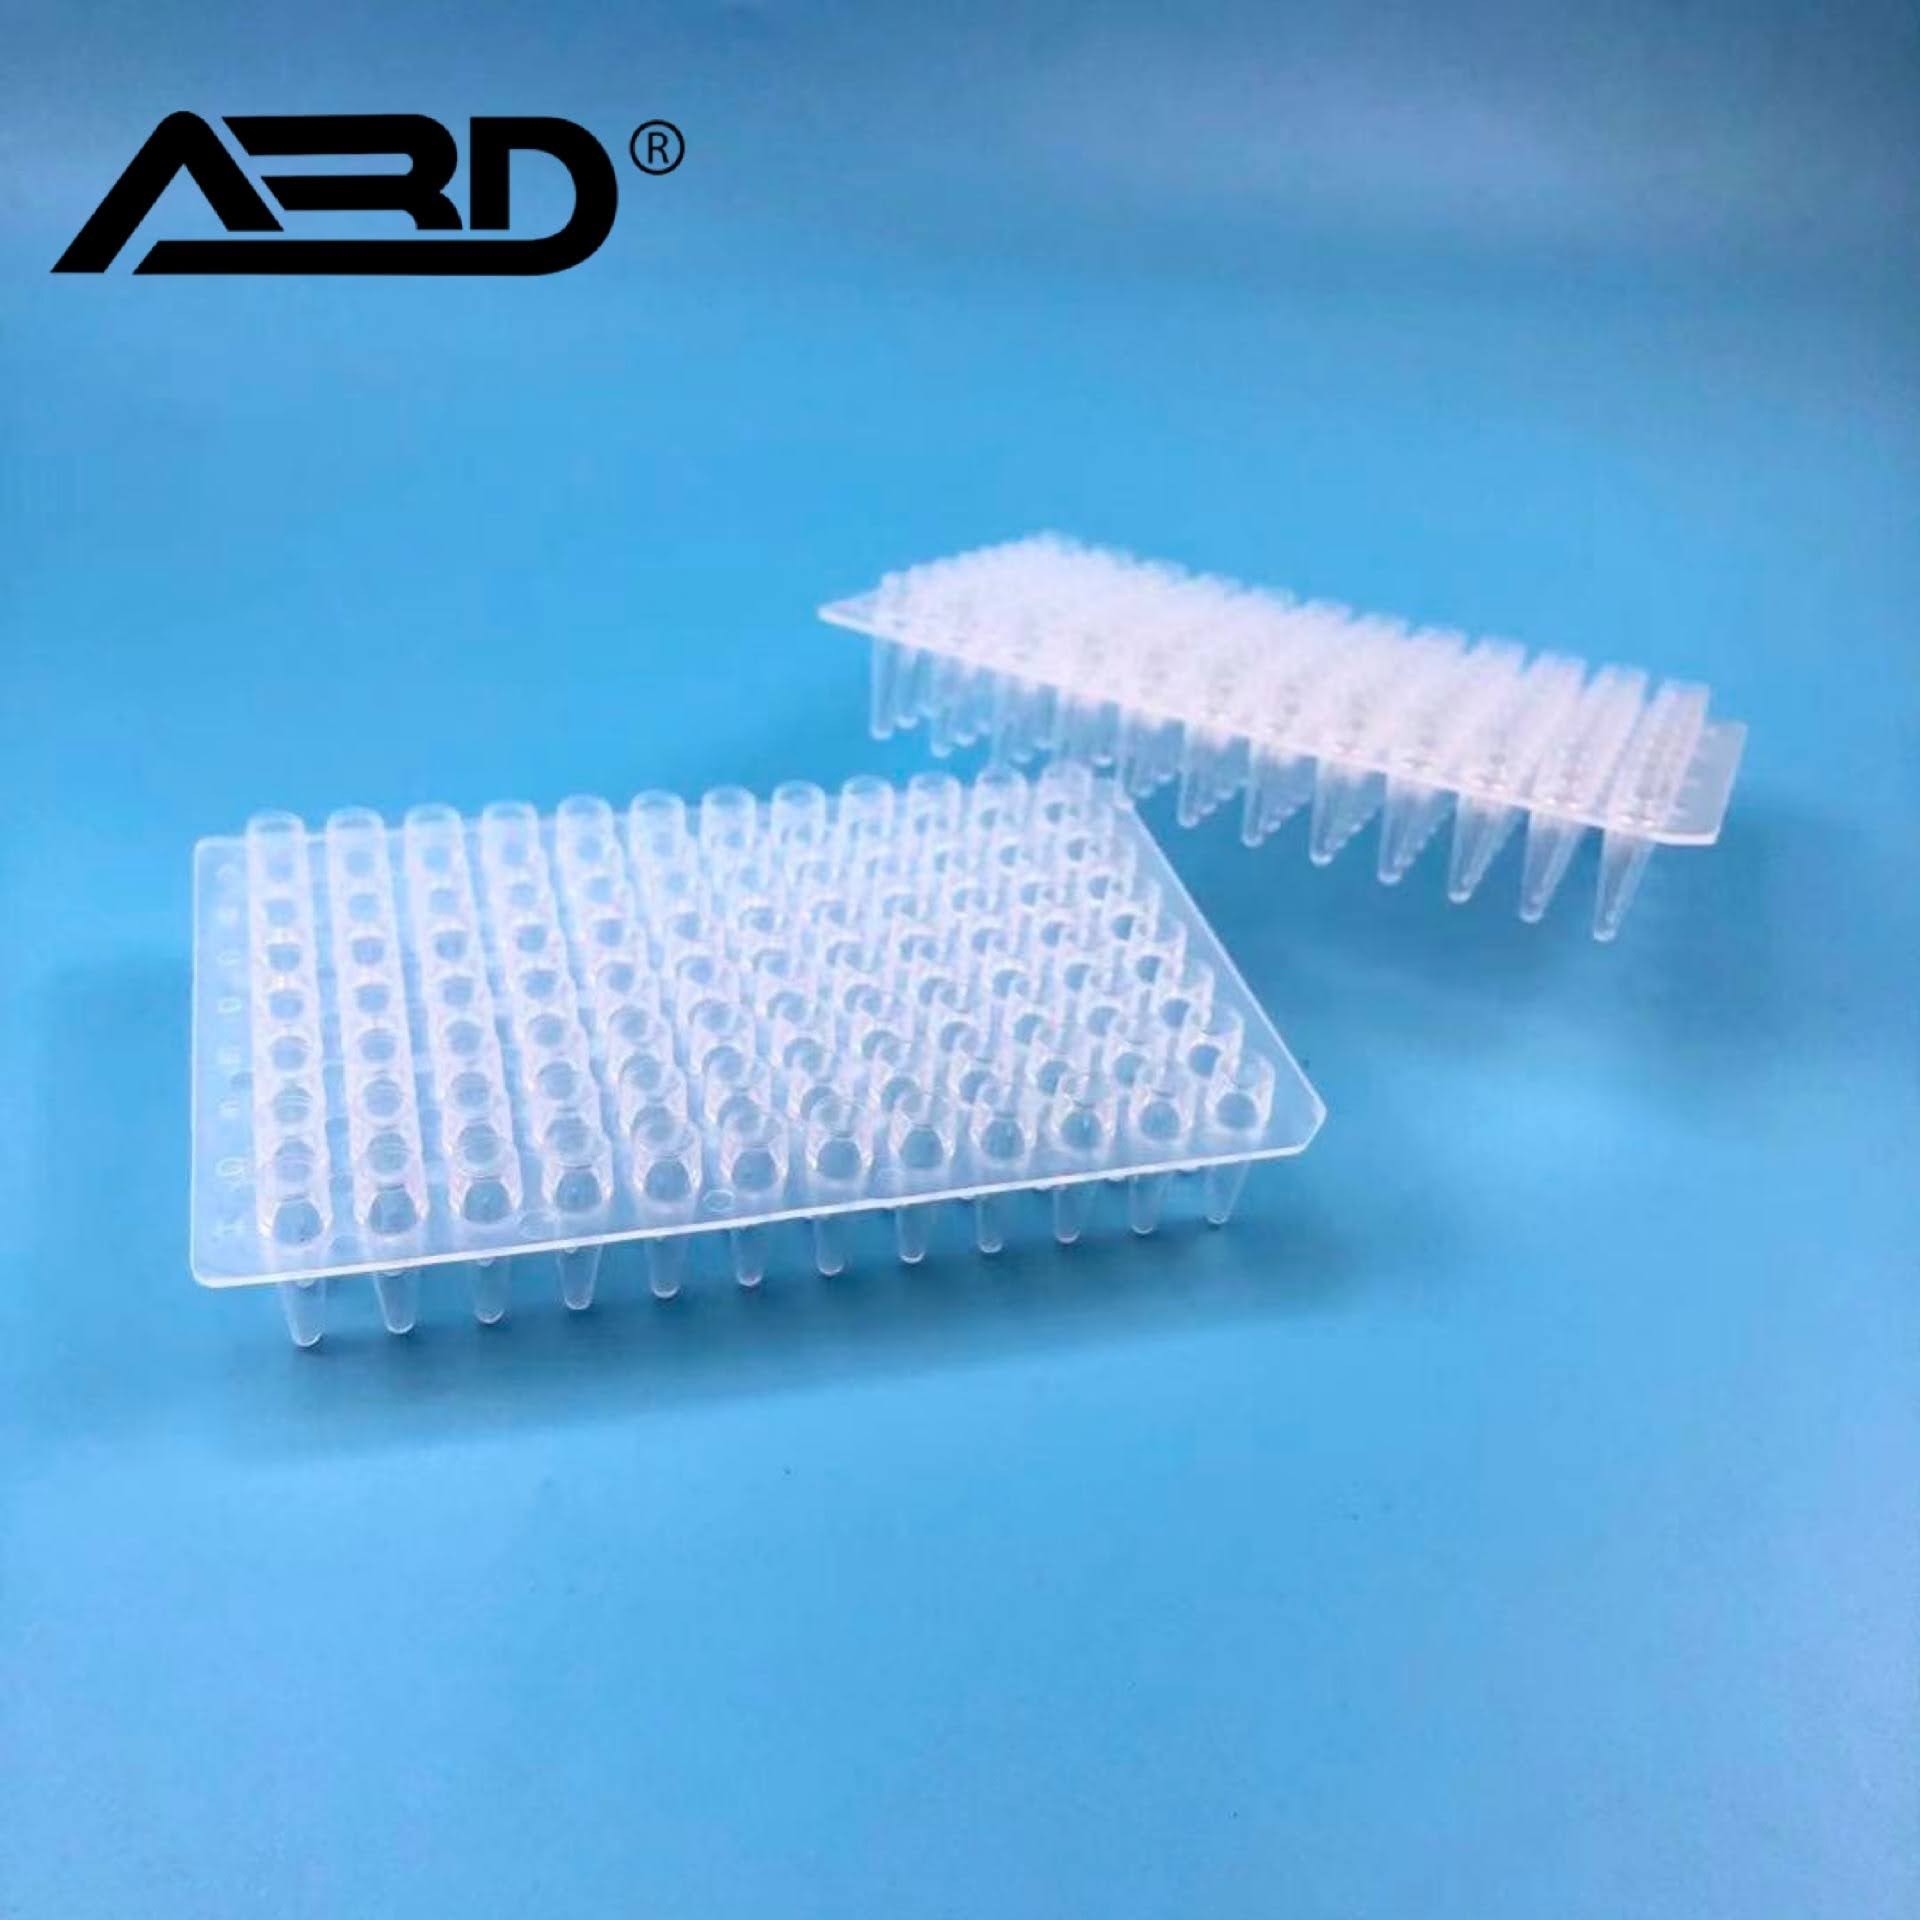 High Mouth 0.2ml, Non-Skirted, 96 Well PCR Plate 